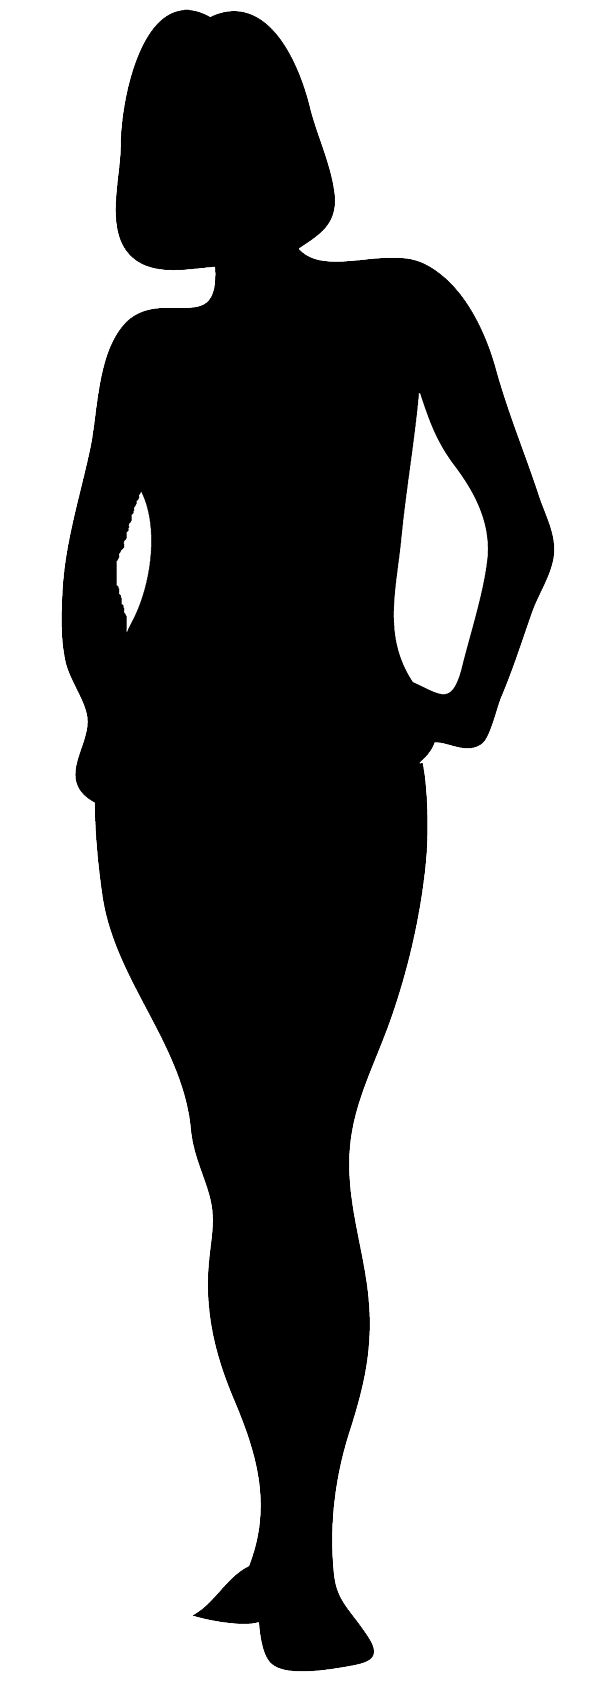 black silhouette of woman standing